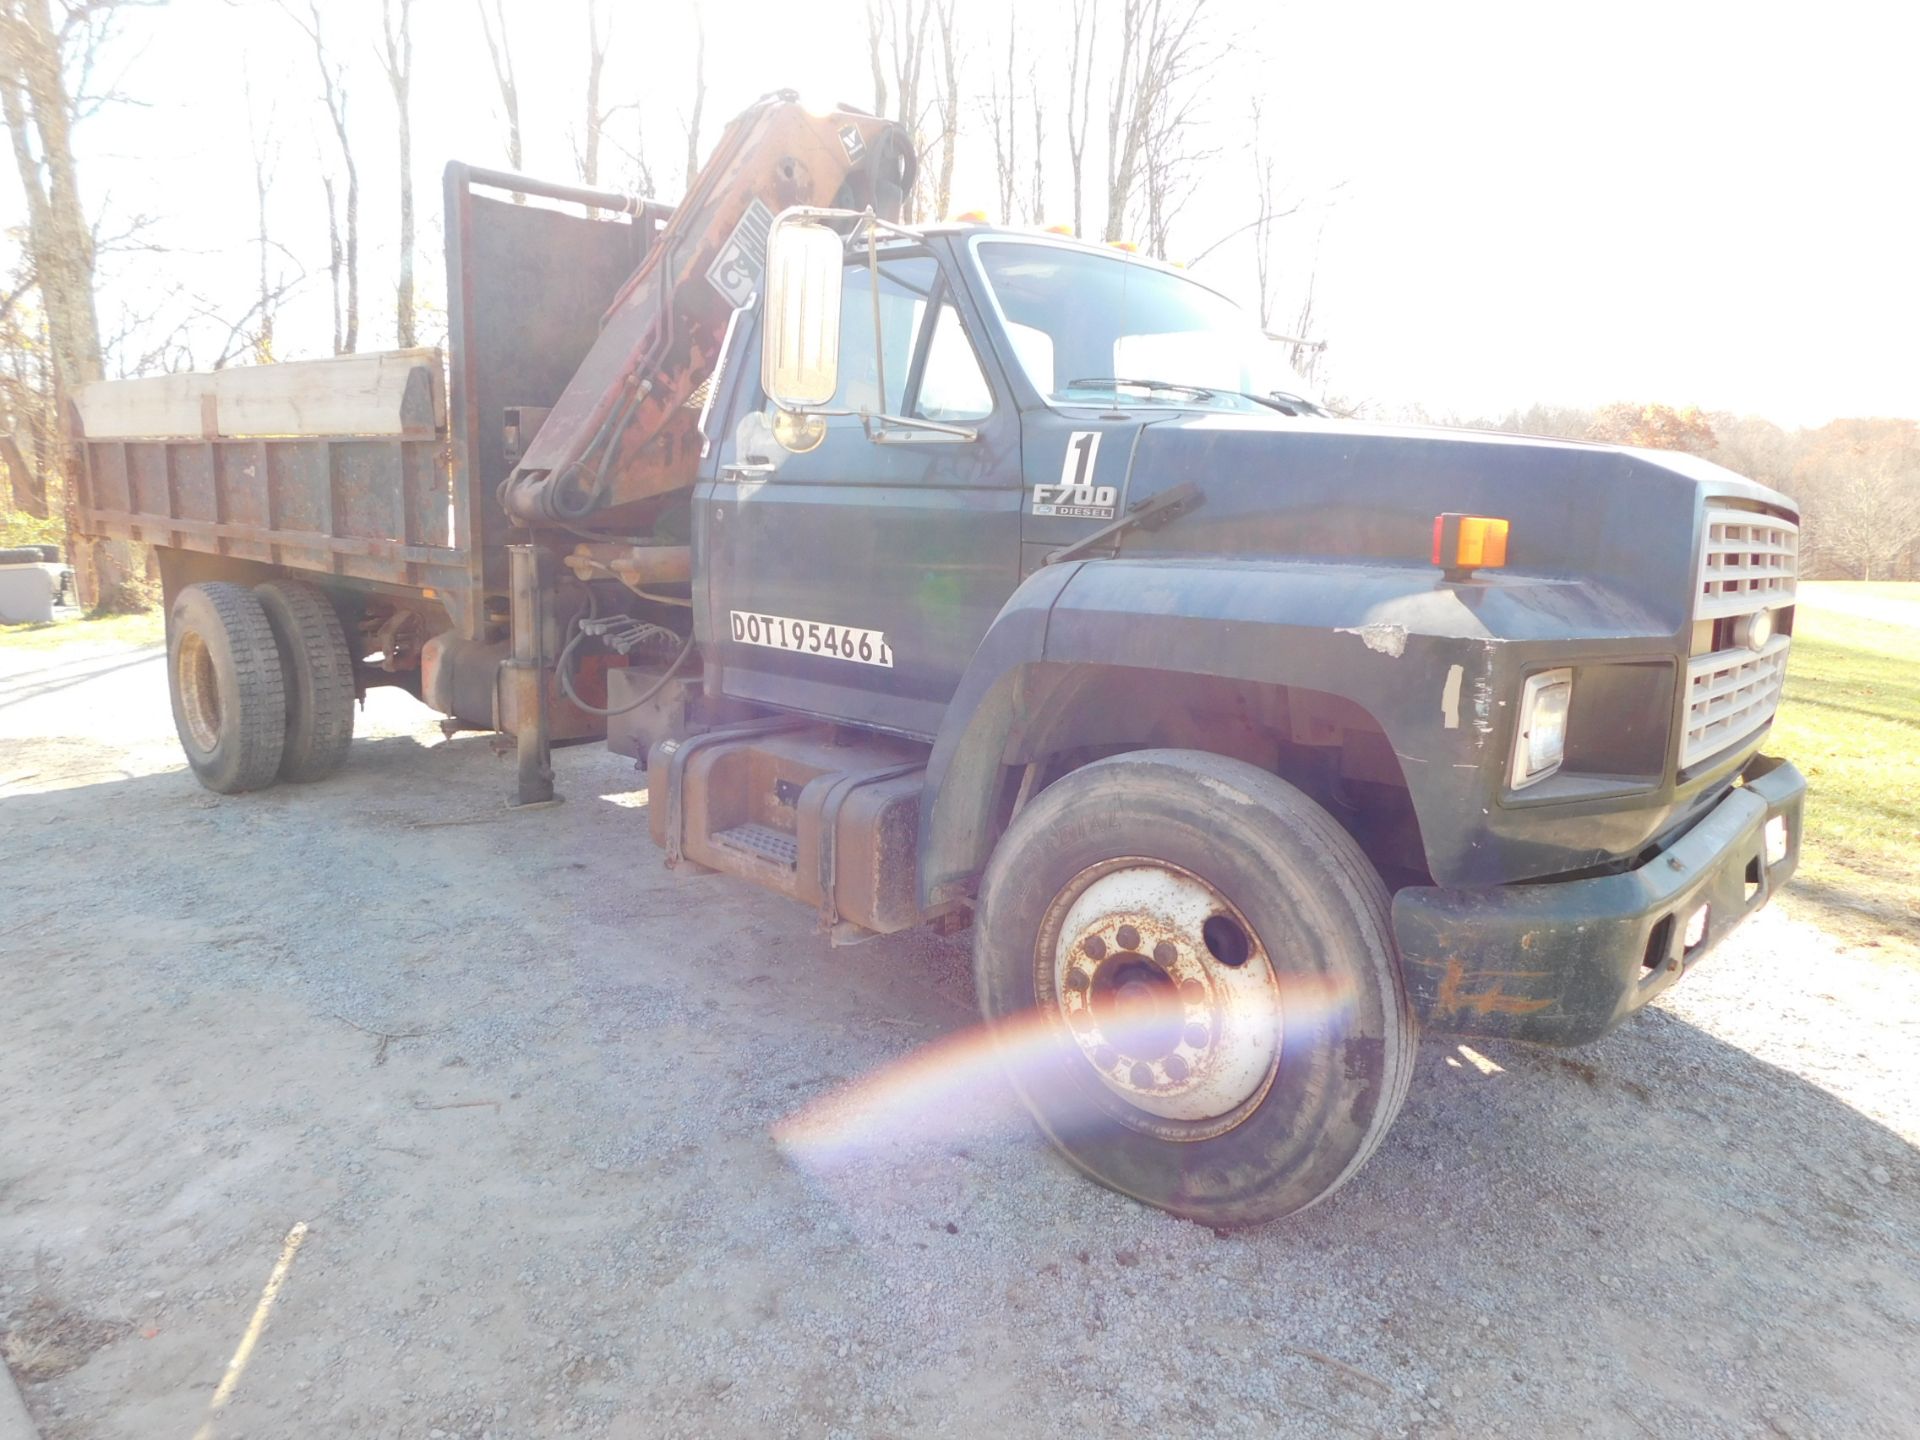 1993 Ford F700 Single Axle Boom Lift Truck, VIN 1FDNK74C0PVA27527, 5-Speed Manual Trasnsmission, - Image 6 of 33